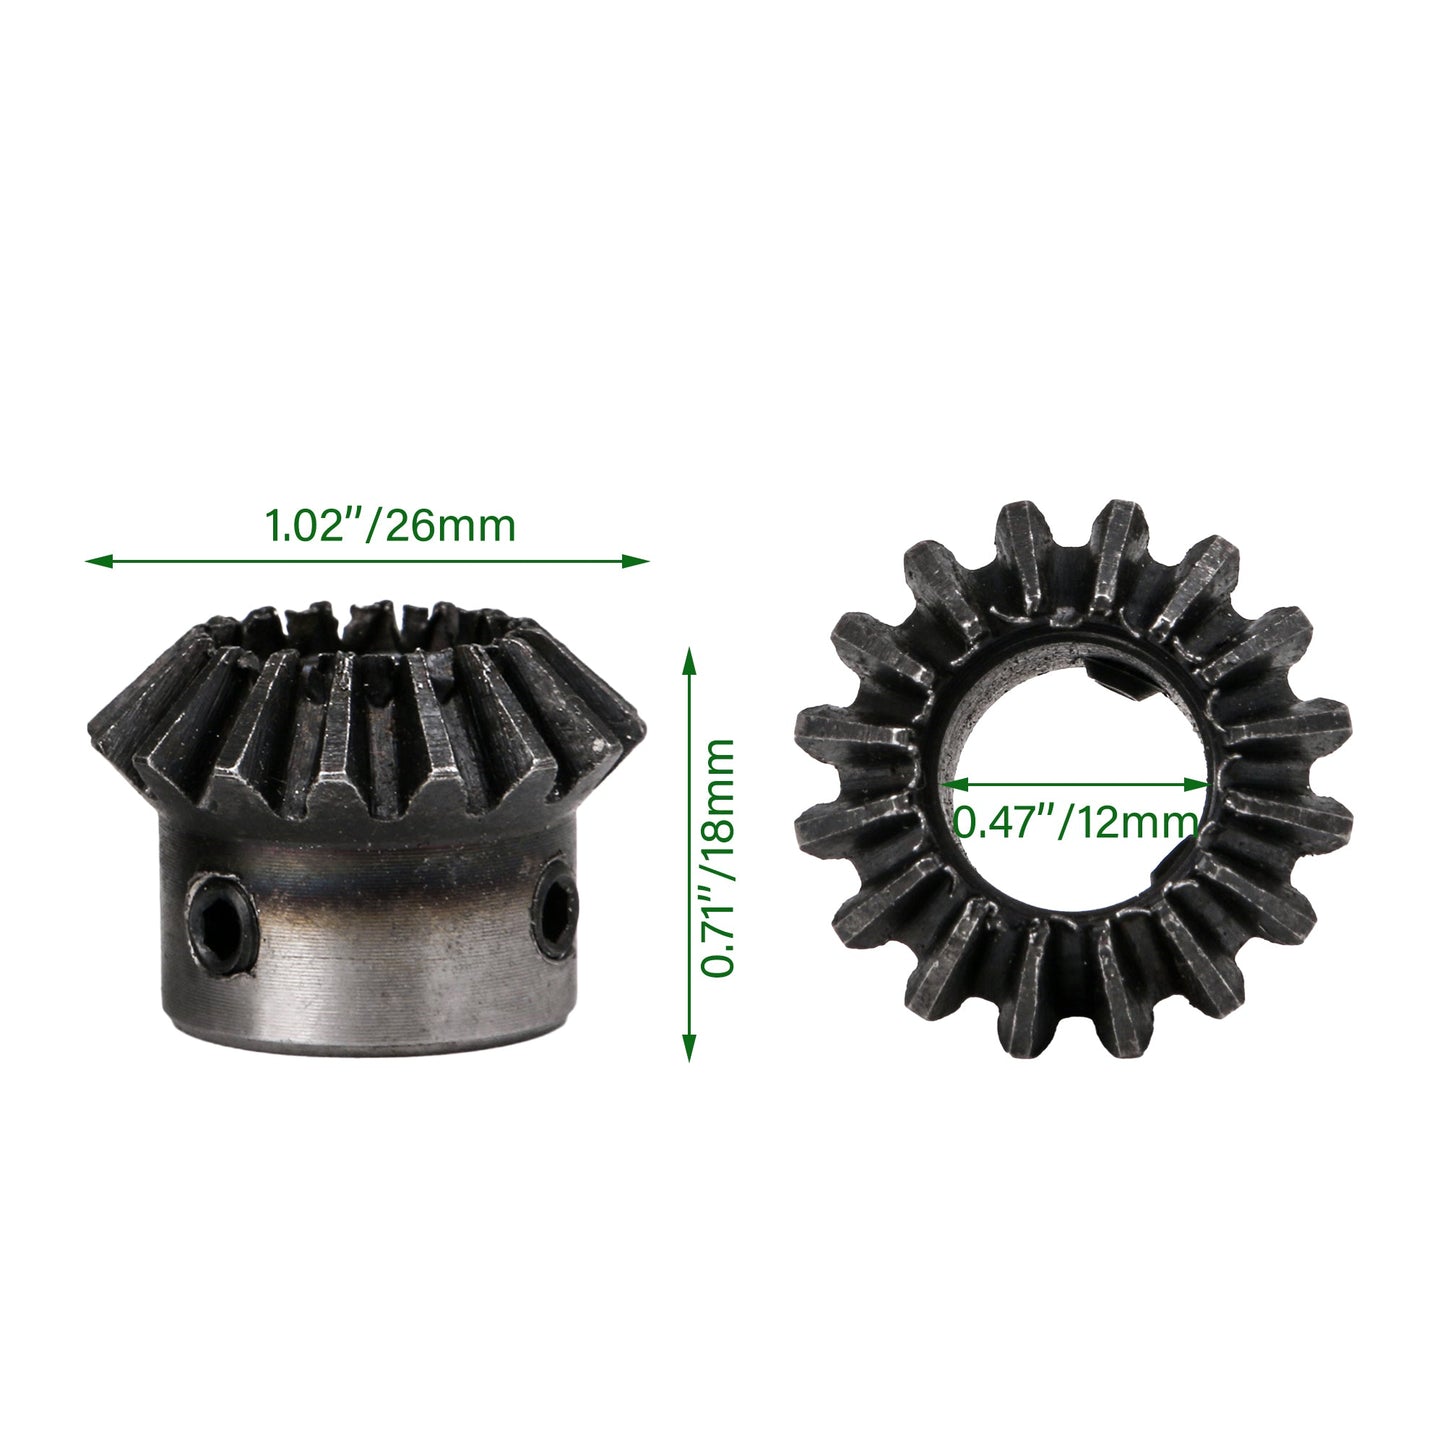 BQLZR Tapered Bevel Gear Wheel 1.5 Modulus 16T 0.47inch Dia for Motor Driving Pack of 4